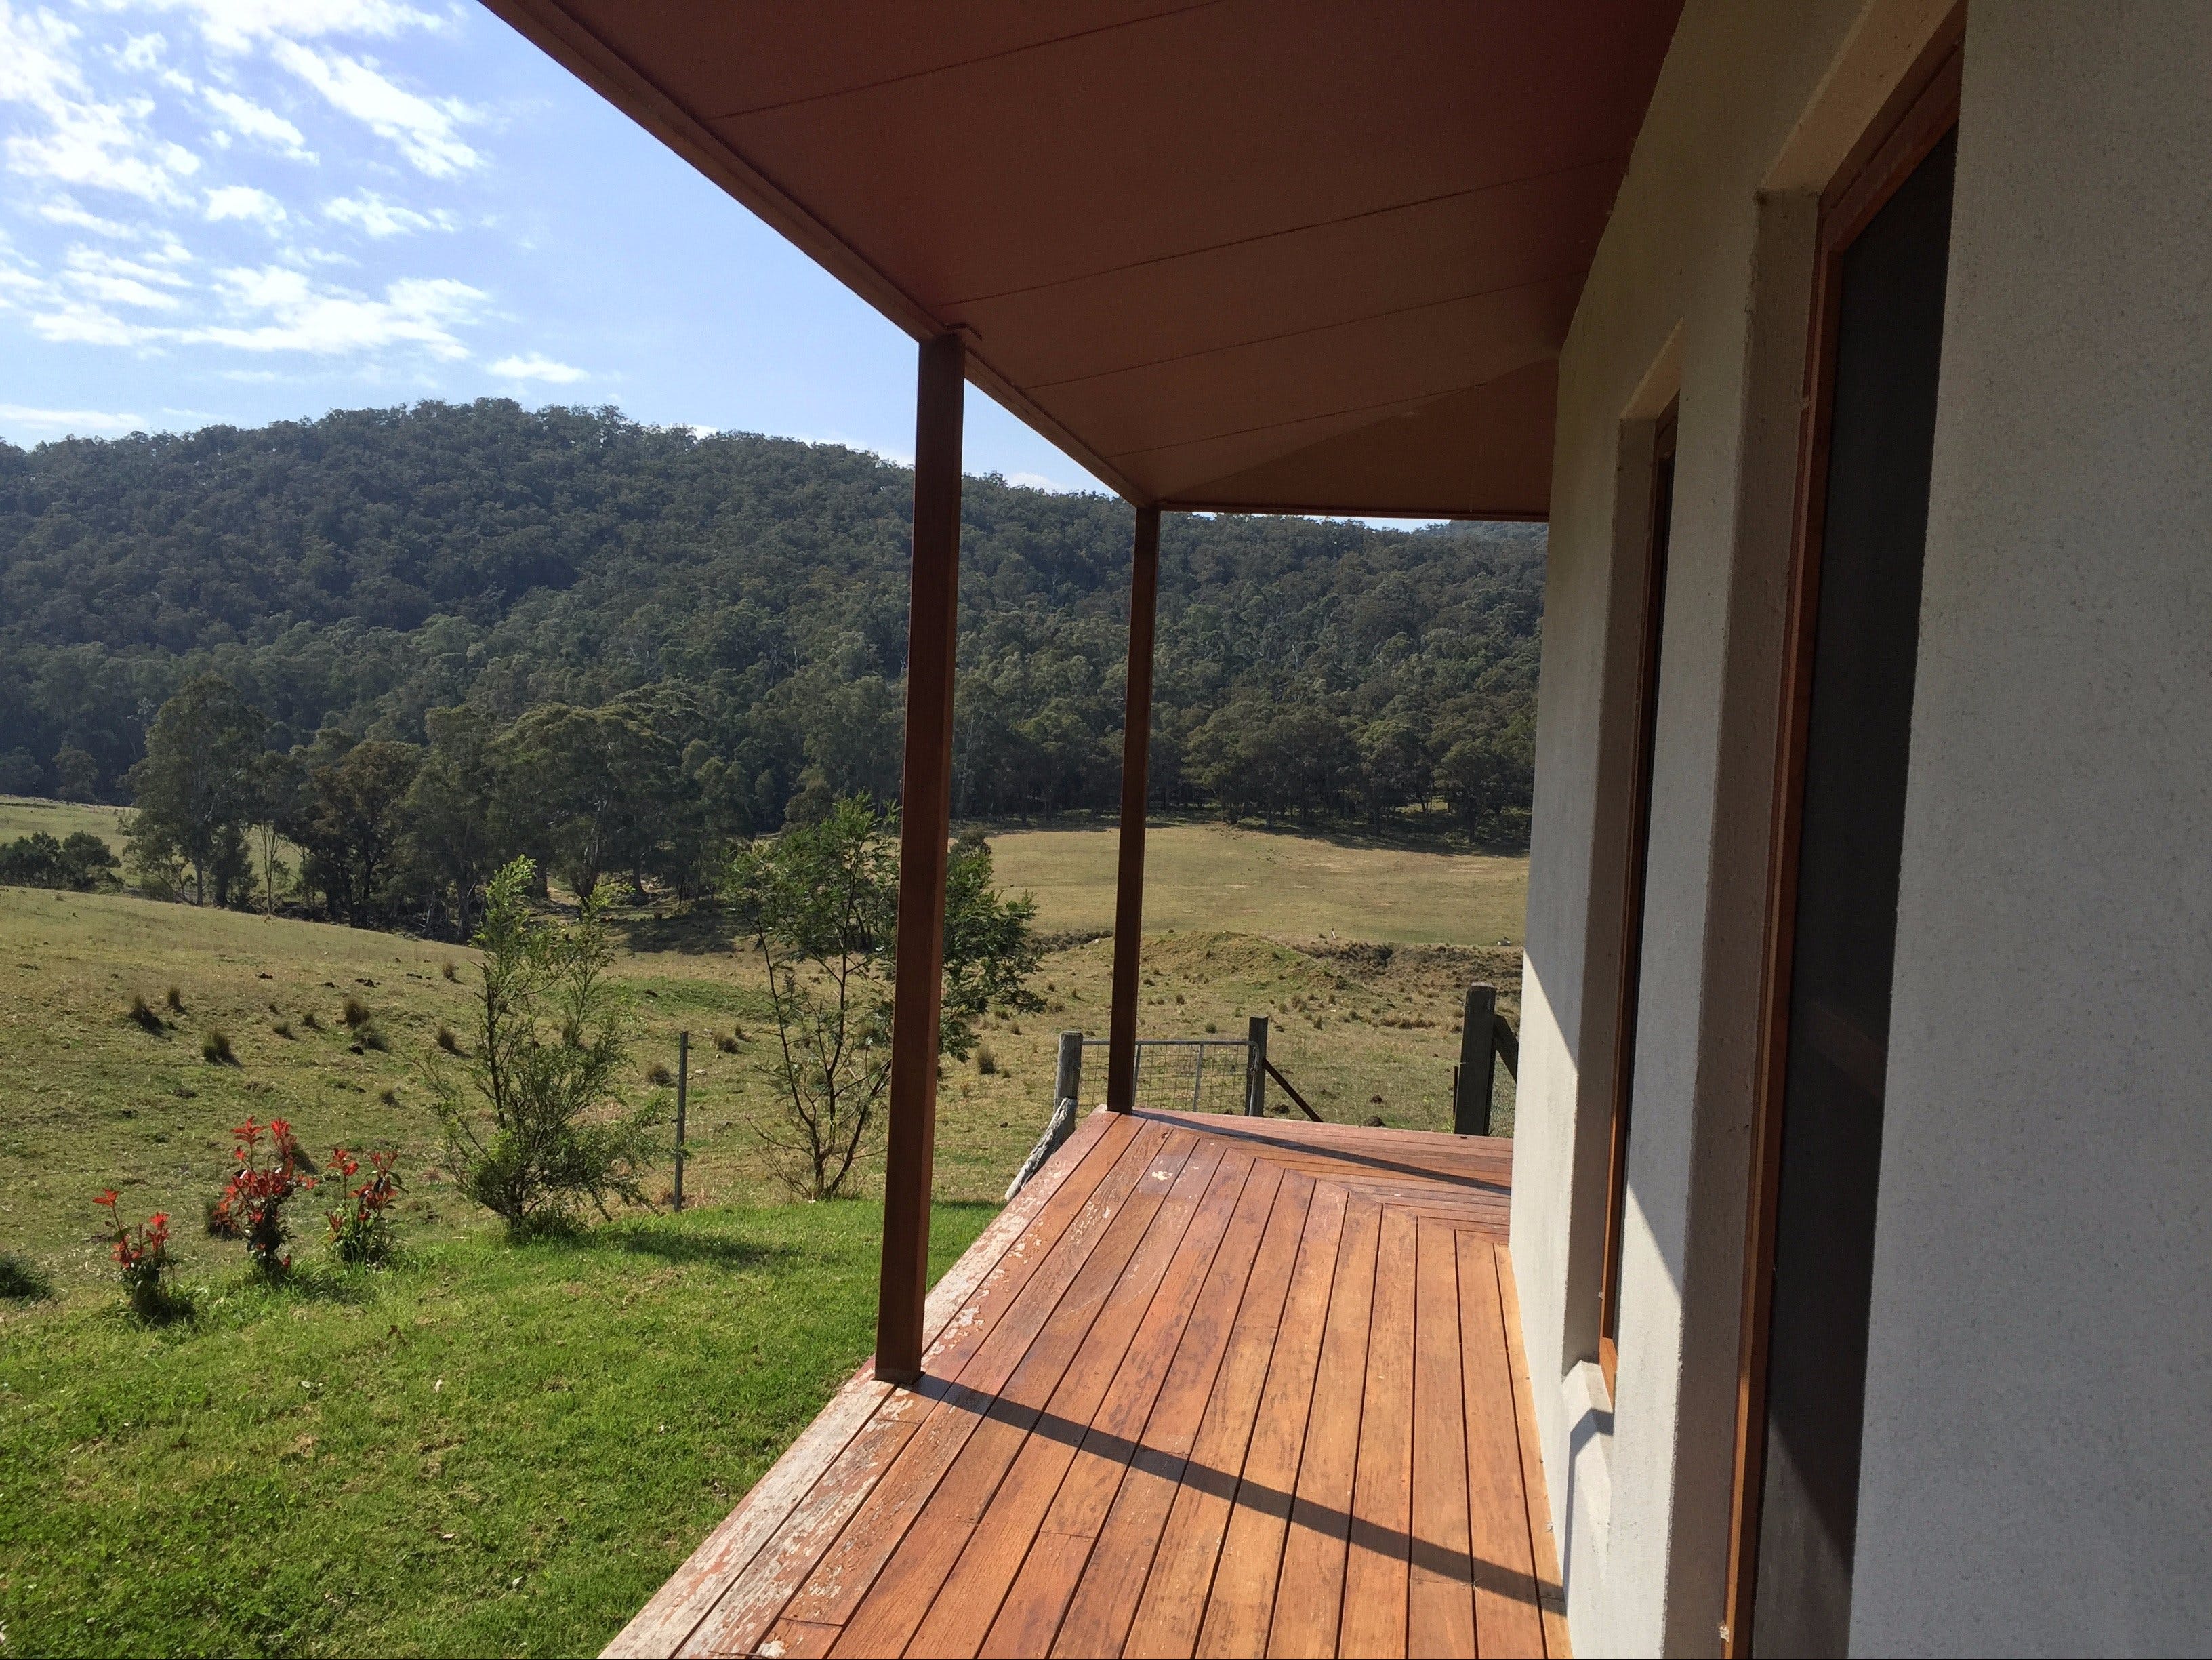 Highland Cattle Farm Stay - Accommodation in Surfers Paradise